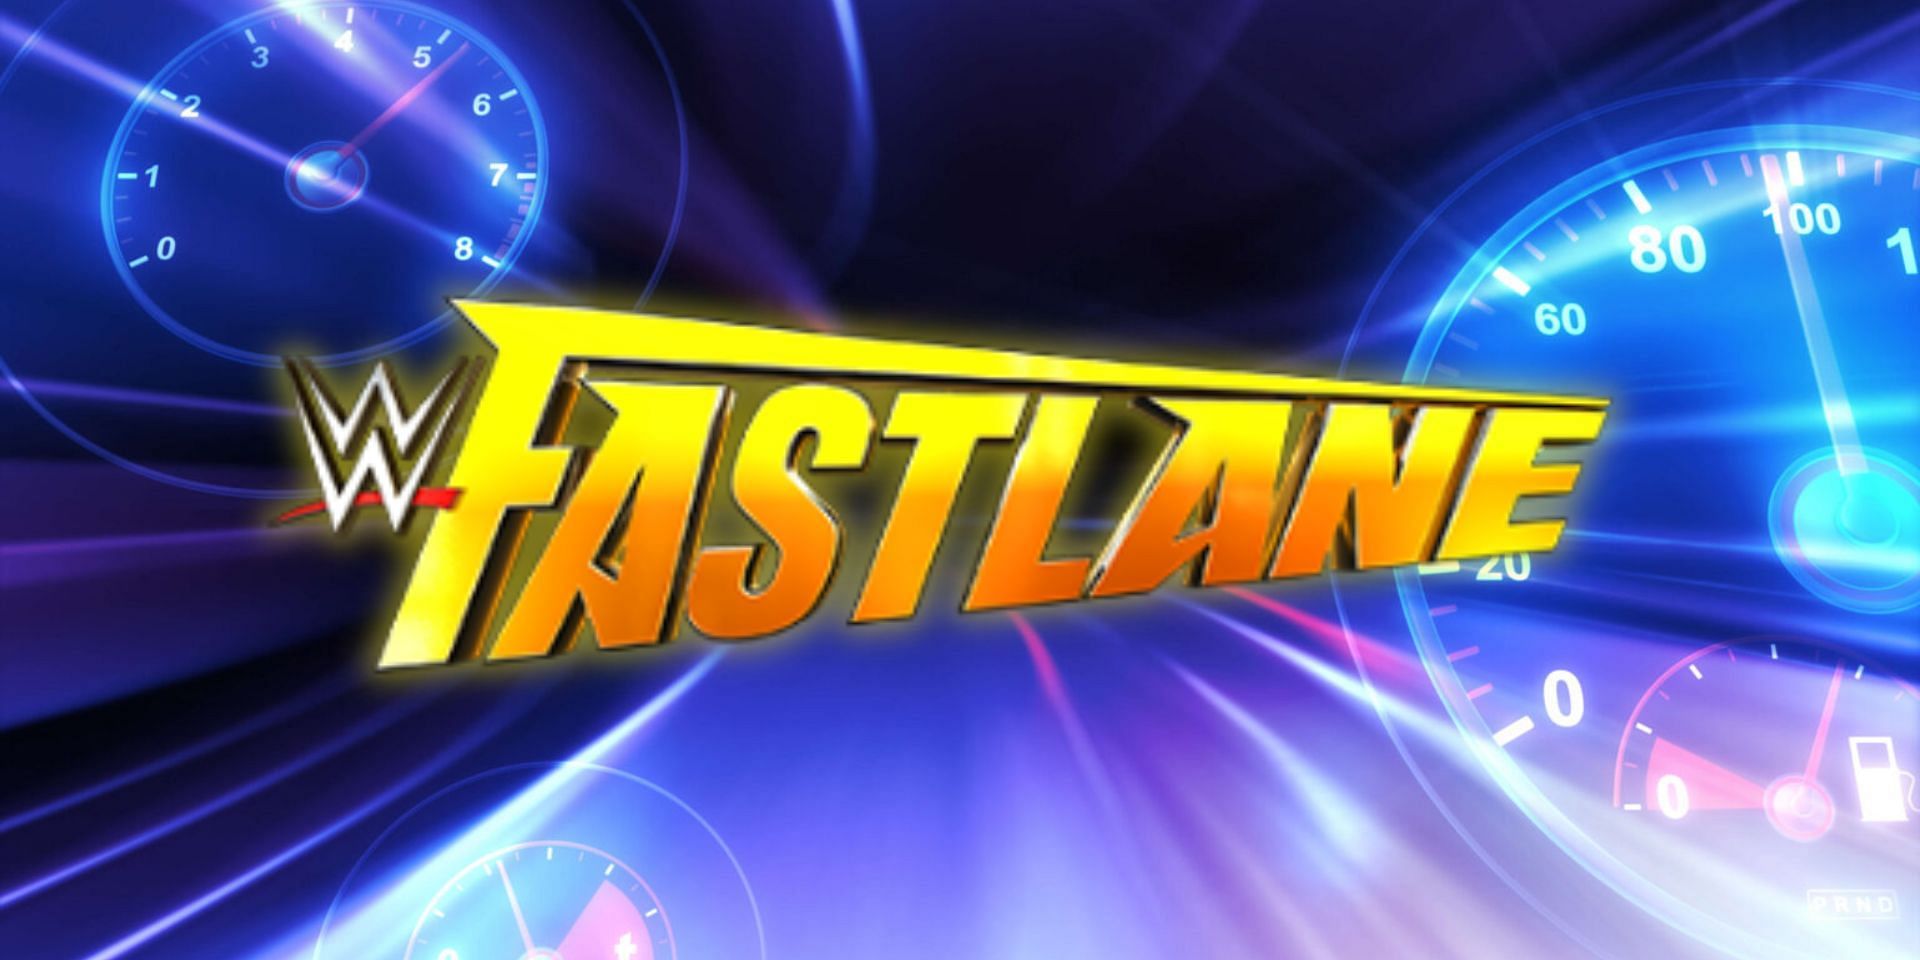 A major title match has been announced for Fastlane